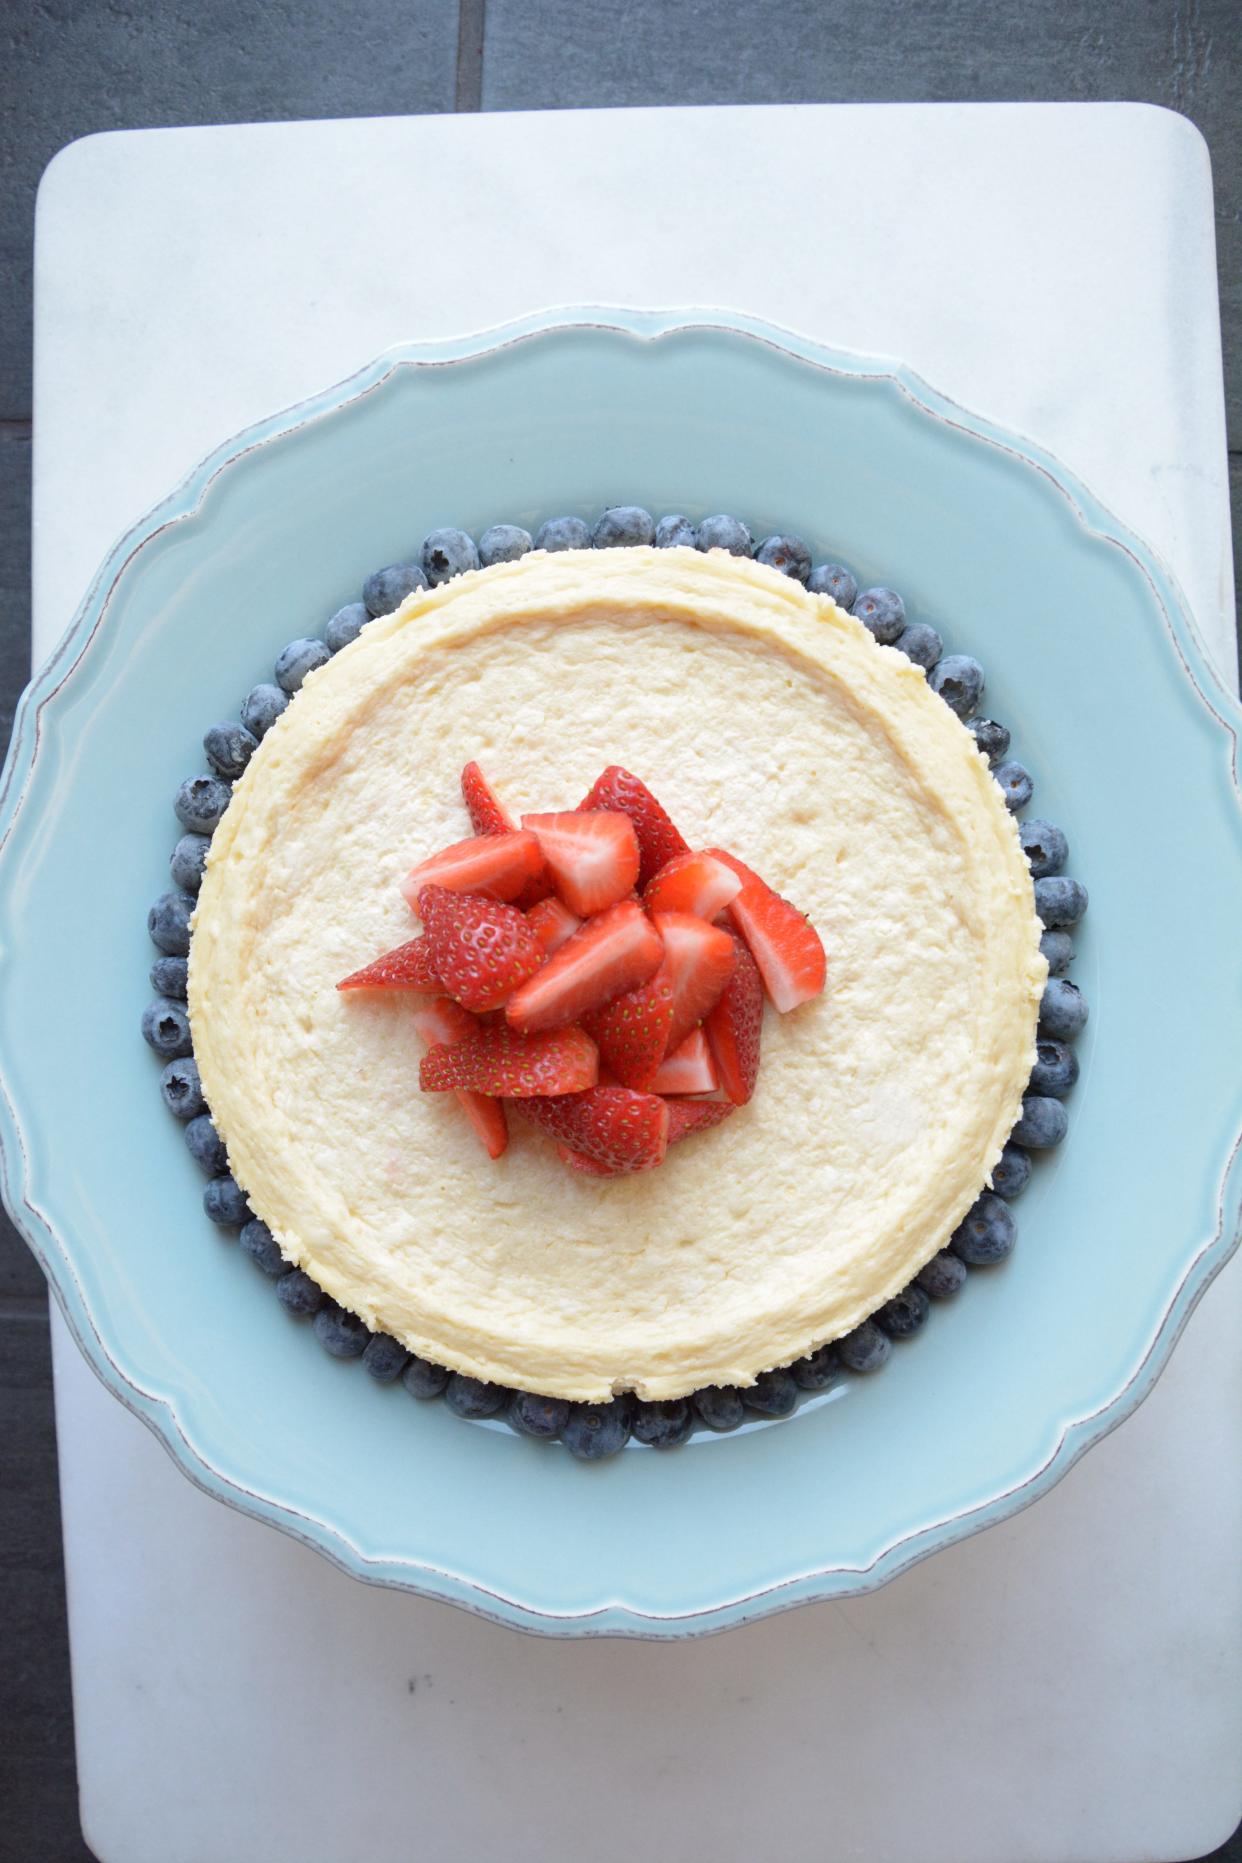 Making cheesecake in a slow cooker keeps it from getting too dry.